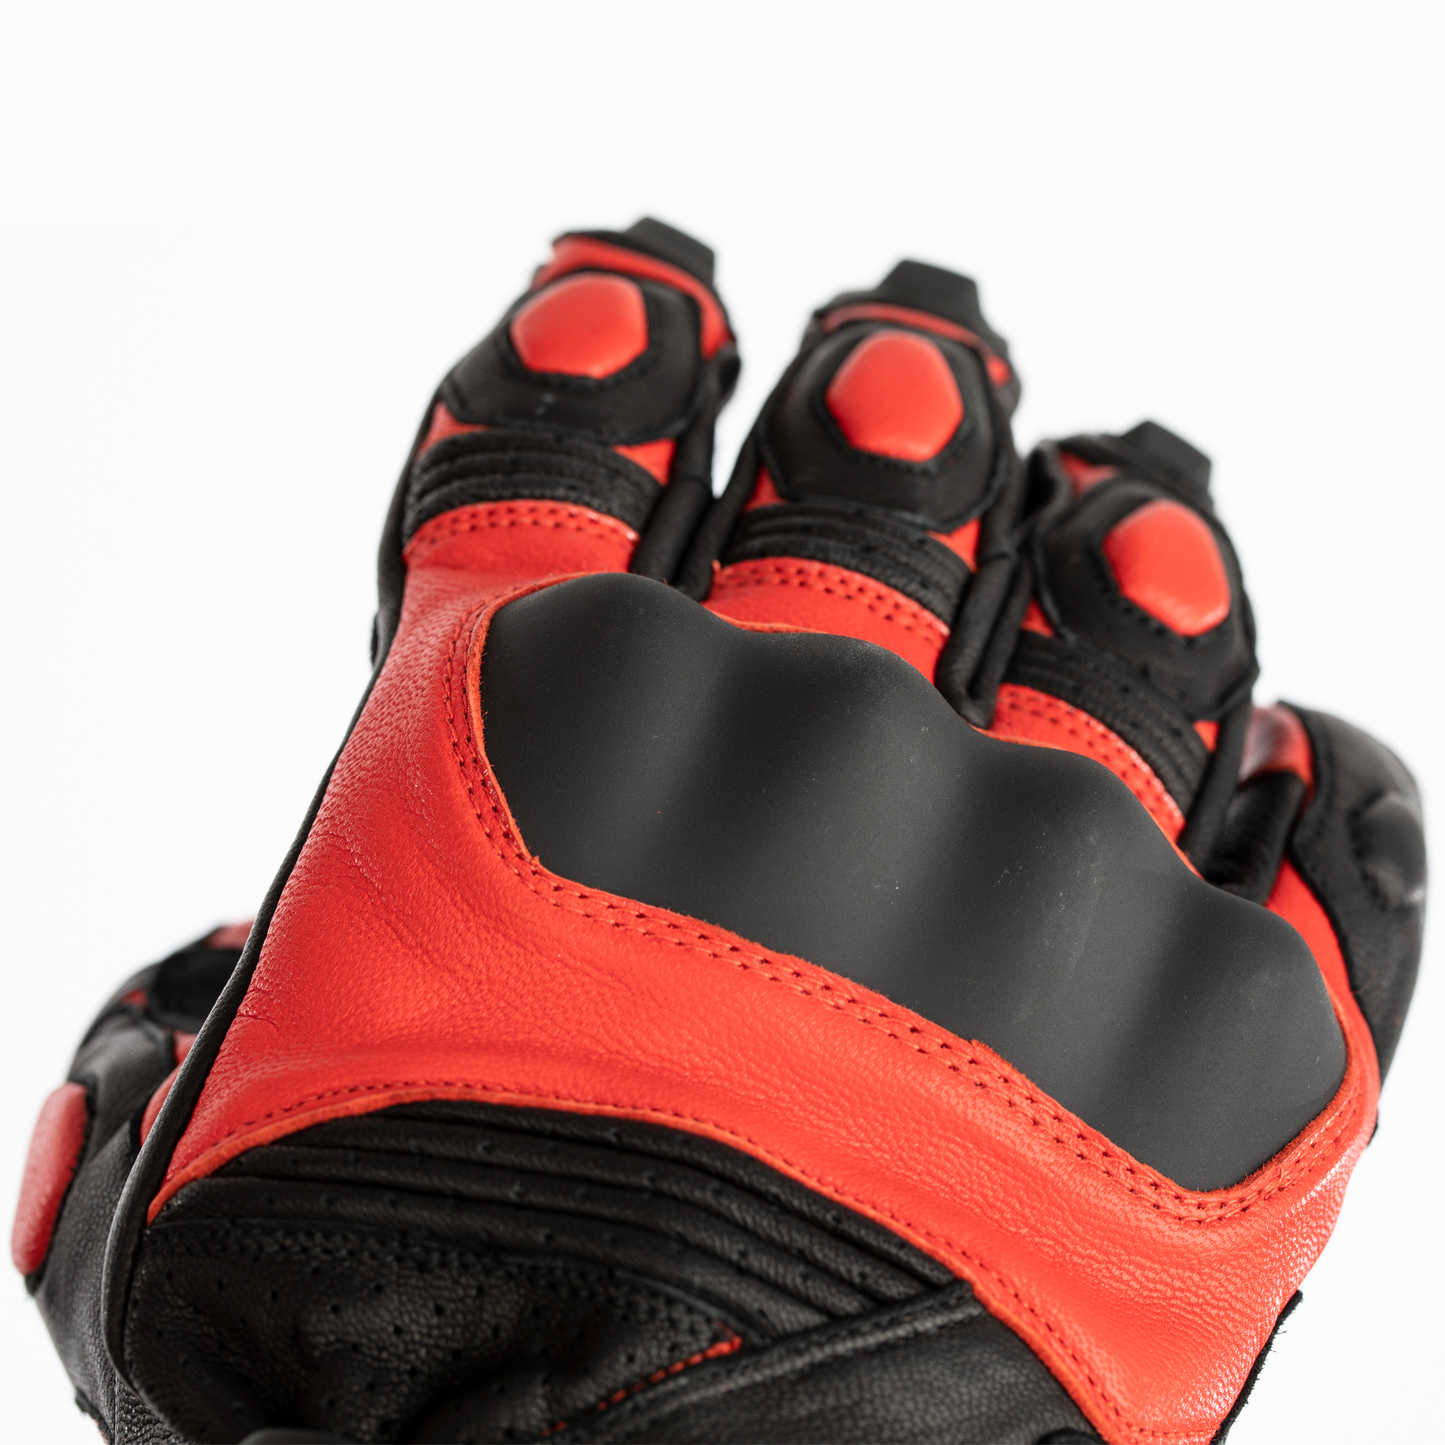 RST GT Leather Racing/Riding Gloves - CE Approved - Red